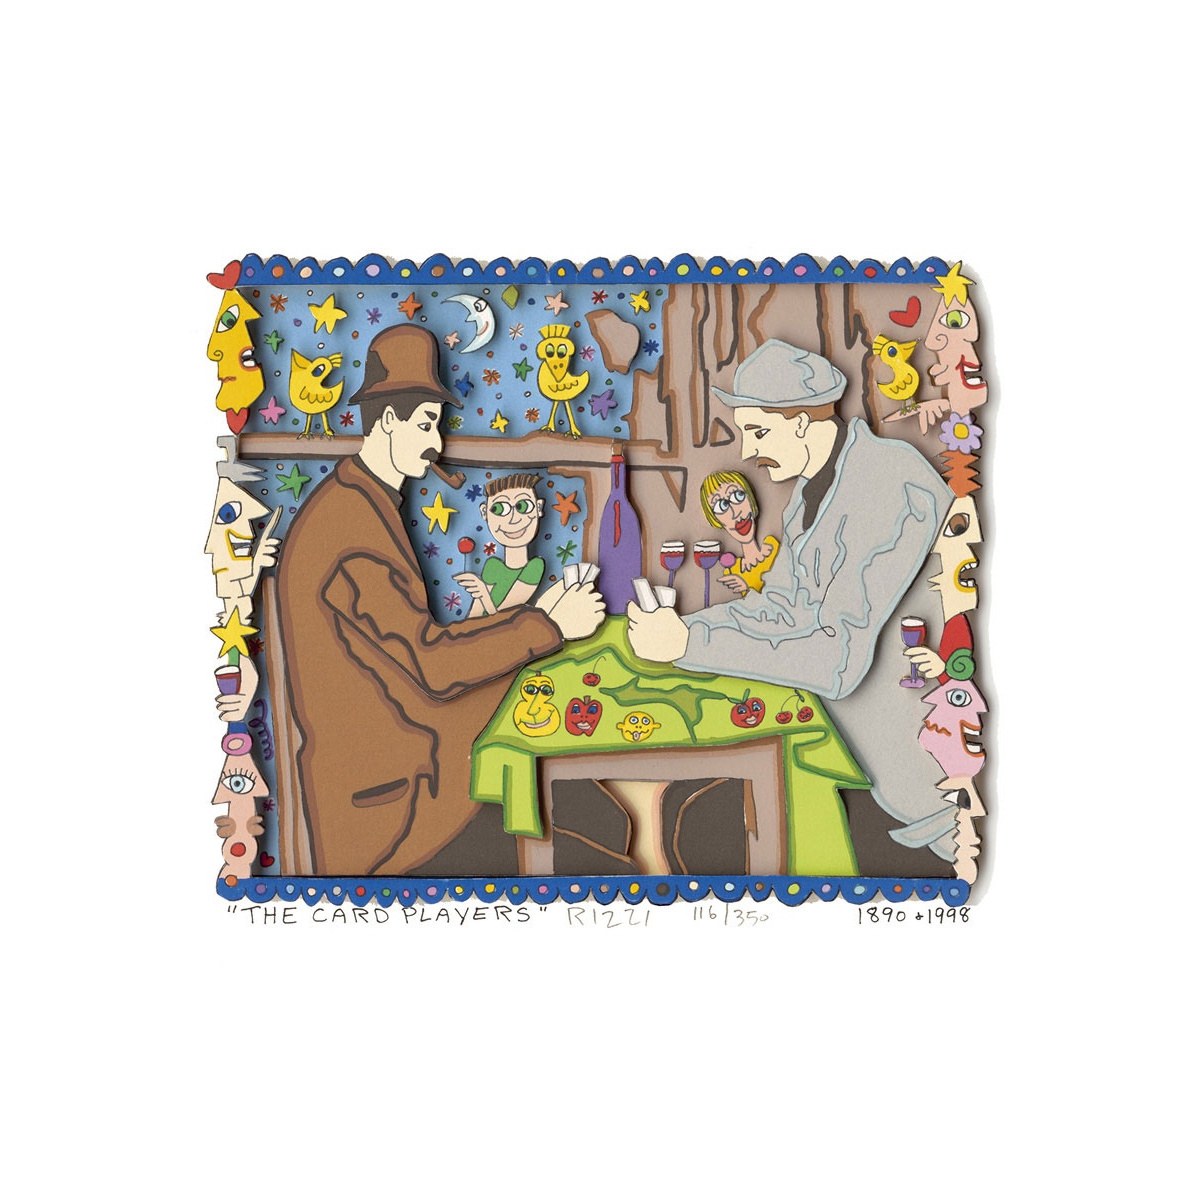 The card players von James Rizzi